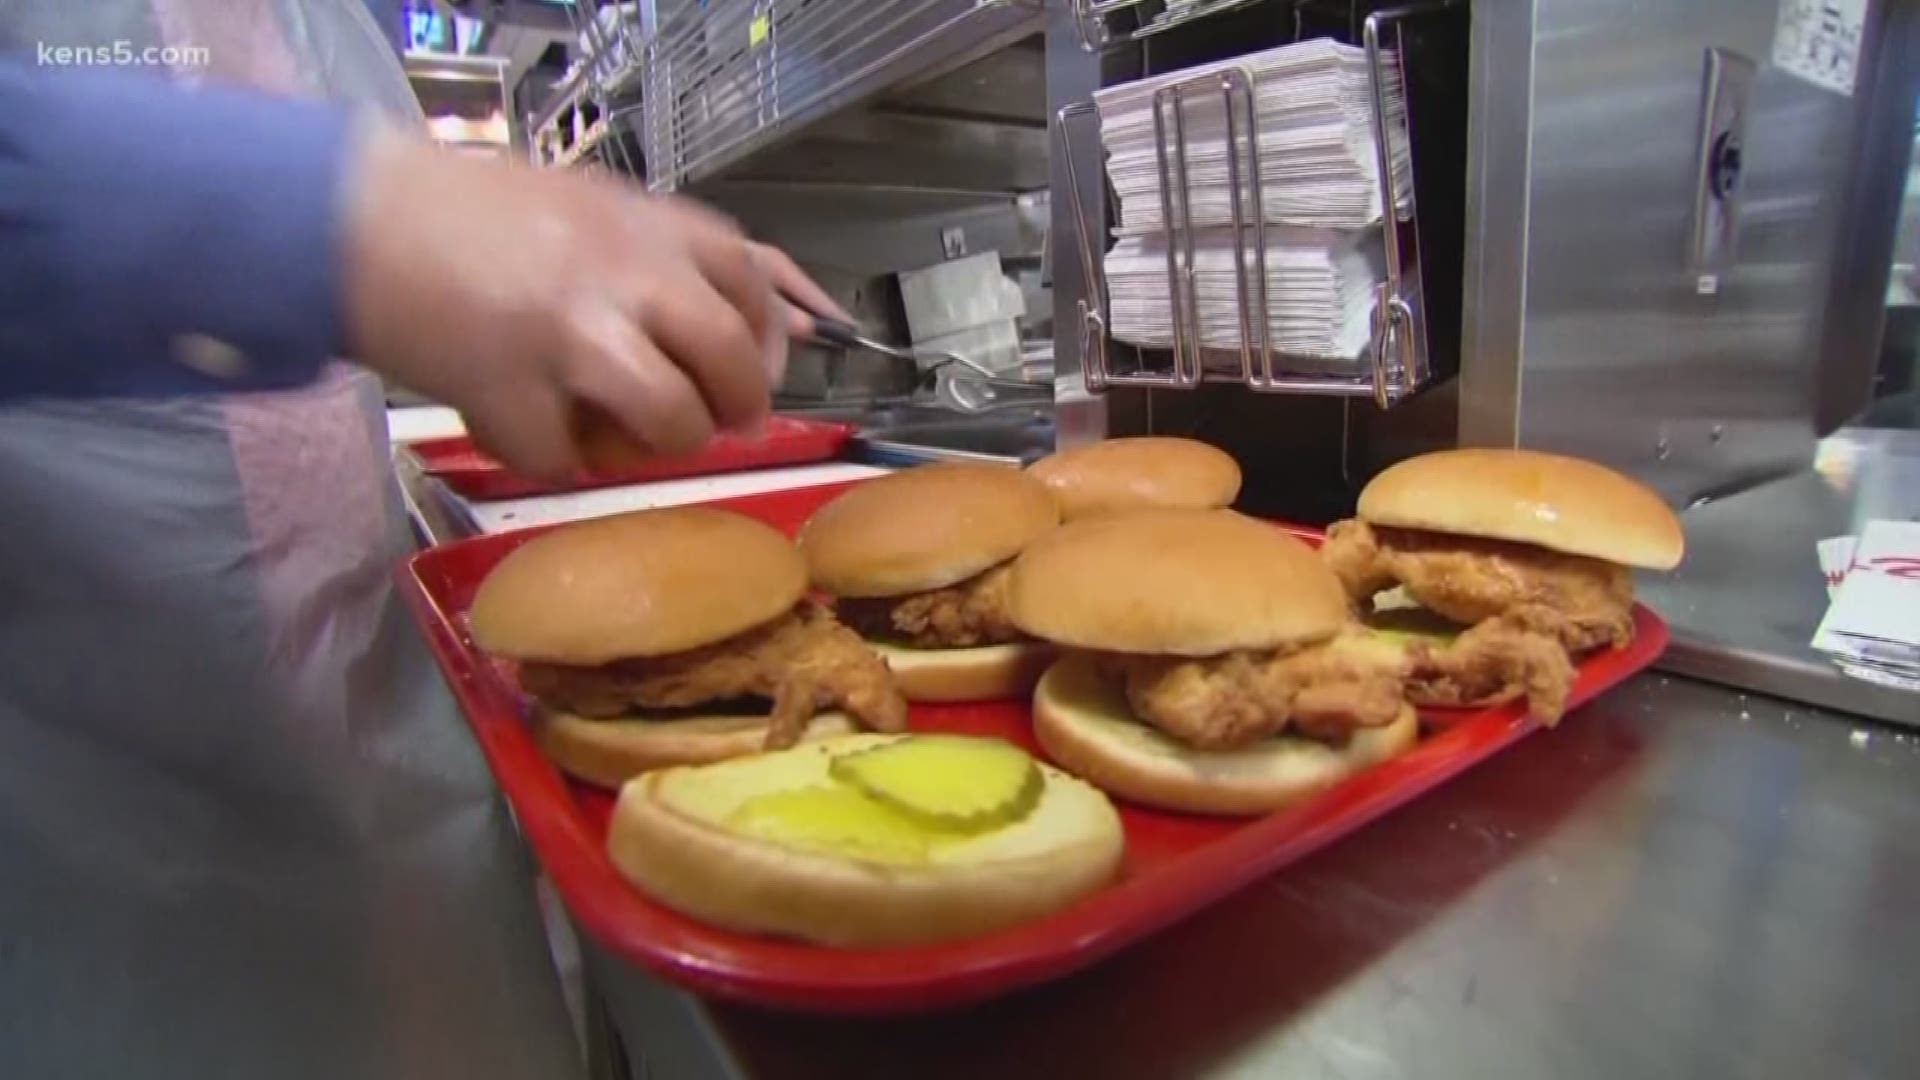 We've learned city council members are getting a flurry of calls and emails over their decision to ban Chick-fil-A from the airport. The council cited the chain's alleged legacy of anti-LGBTQ behavior. But tonight, the mayor is giving a different reason for the ban. Eyewitness News reporter Henry Ramos explains.